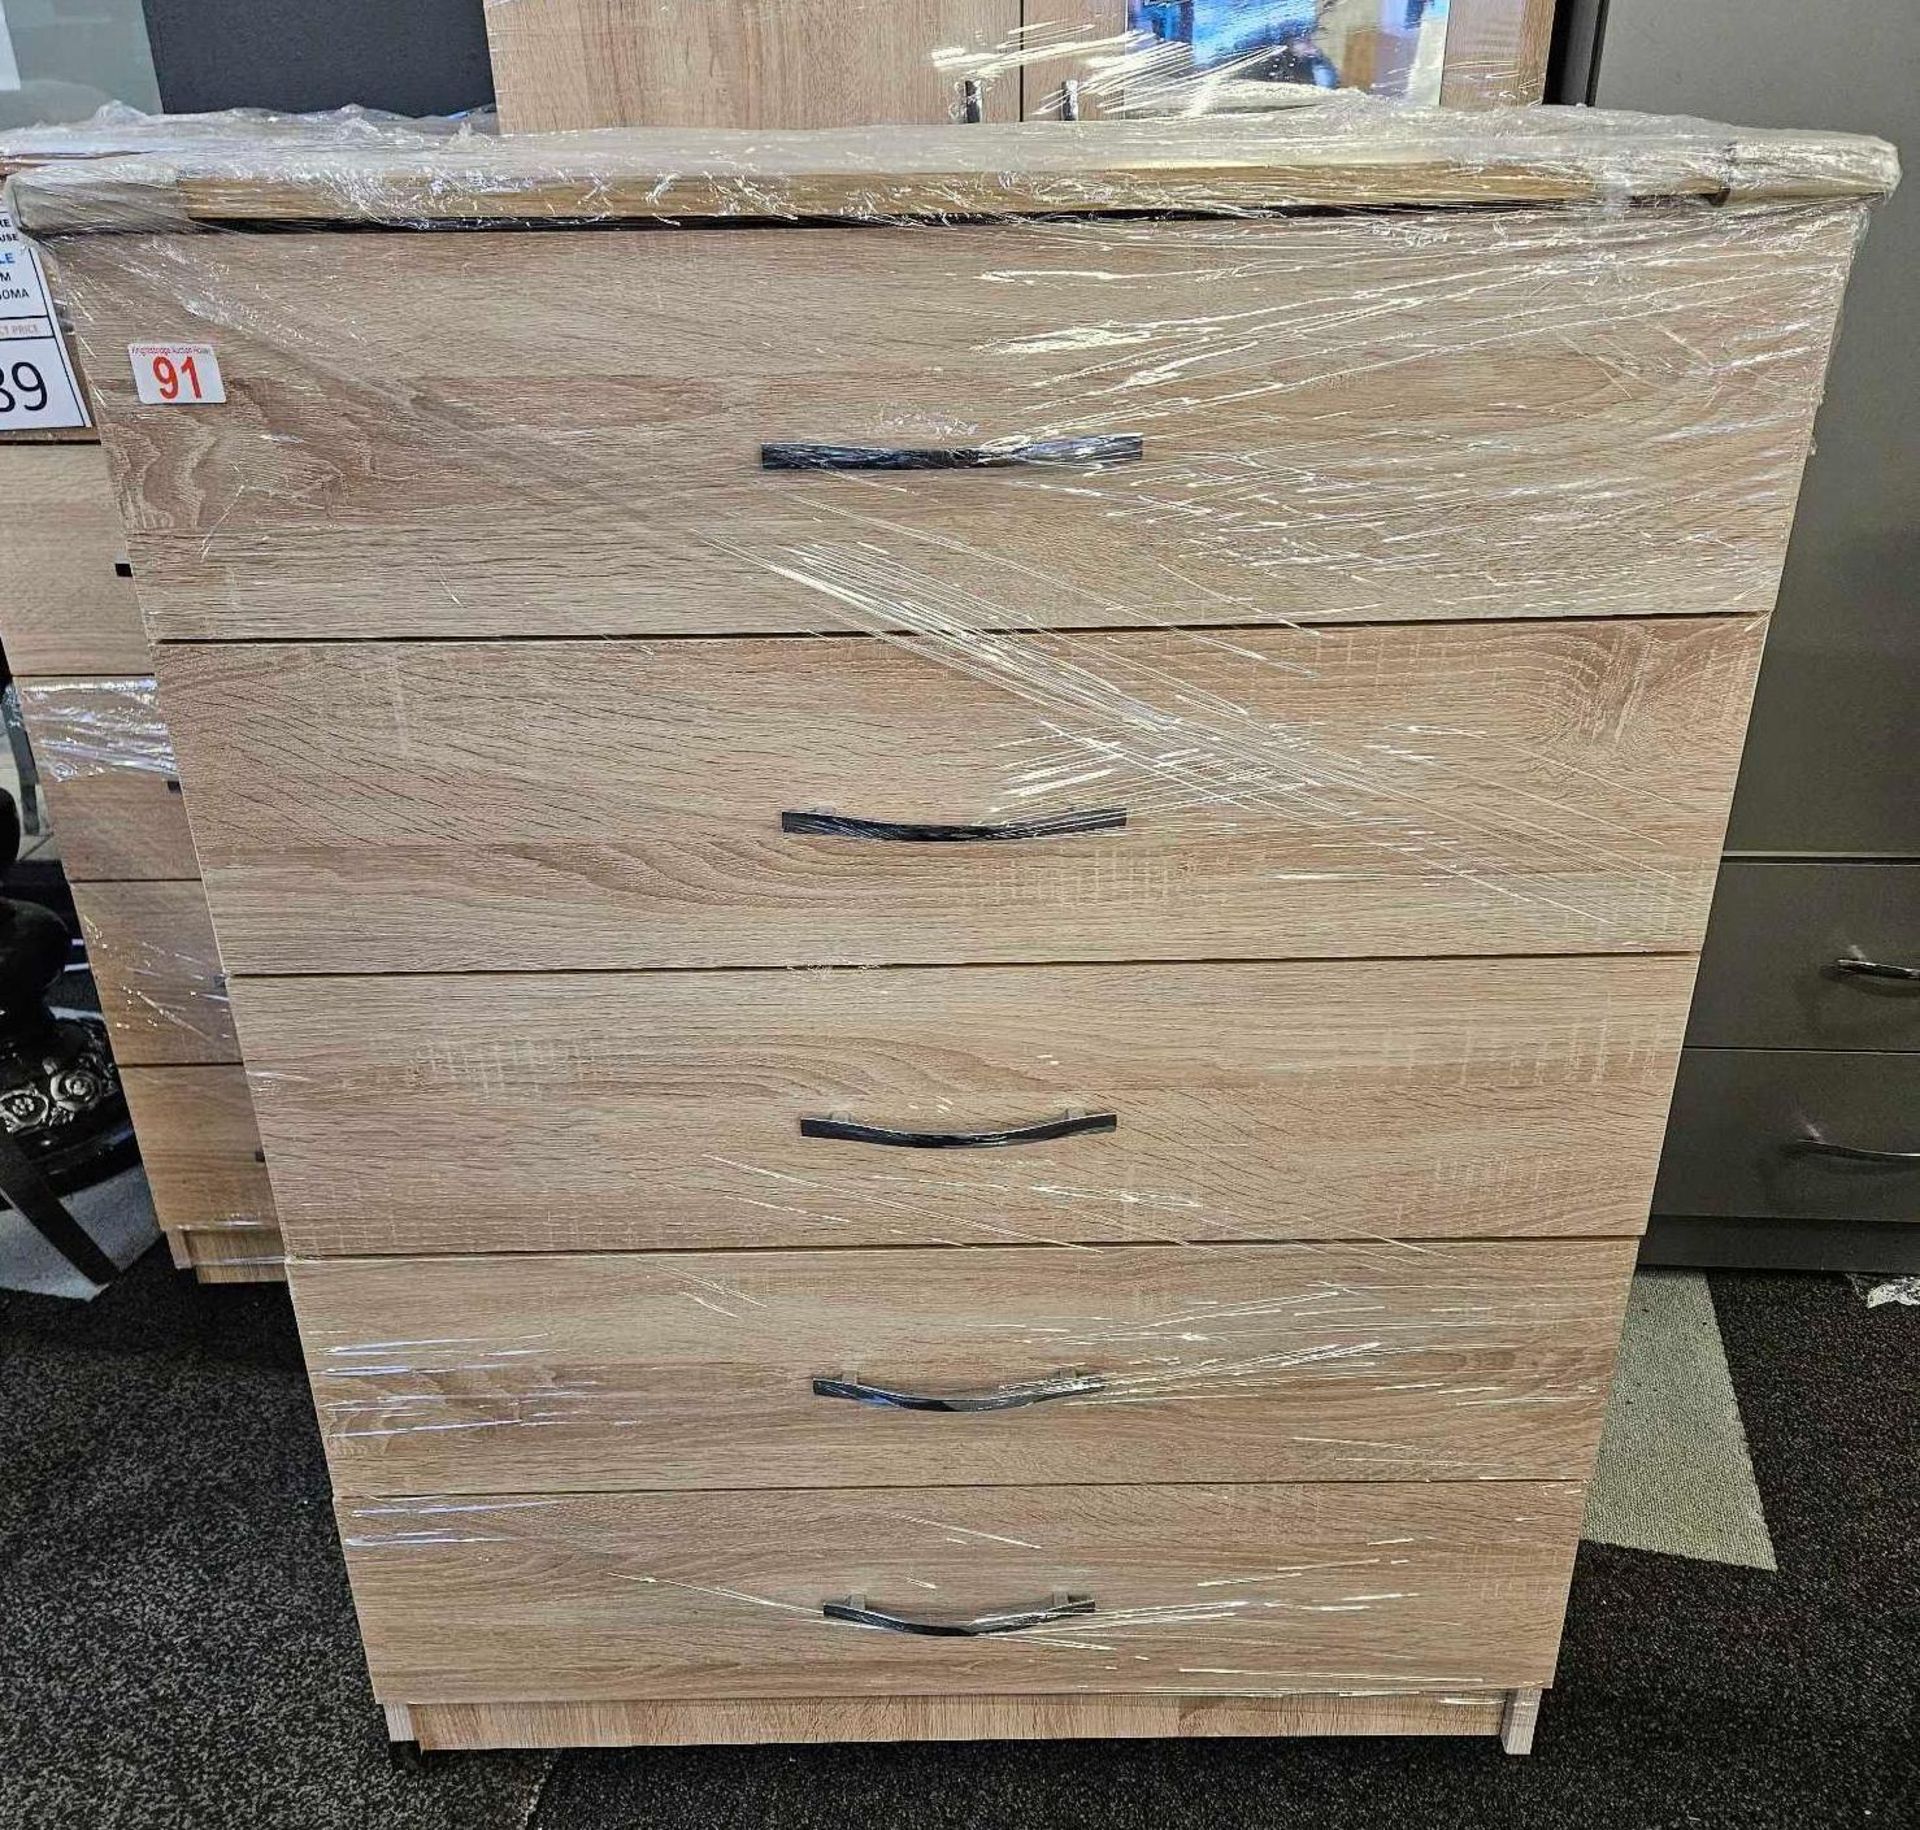 *BRAND NEW* Sanoma 5 drawer chest with oak finish